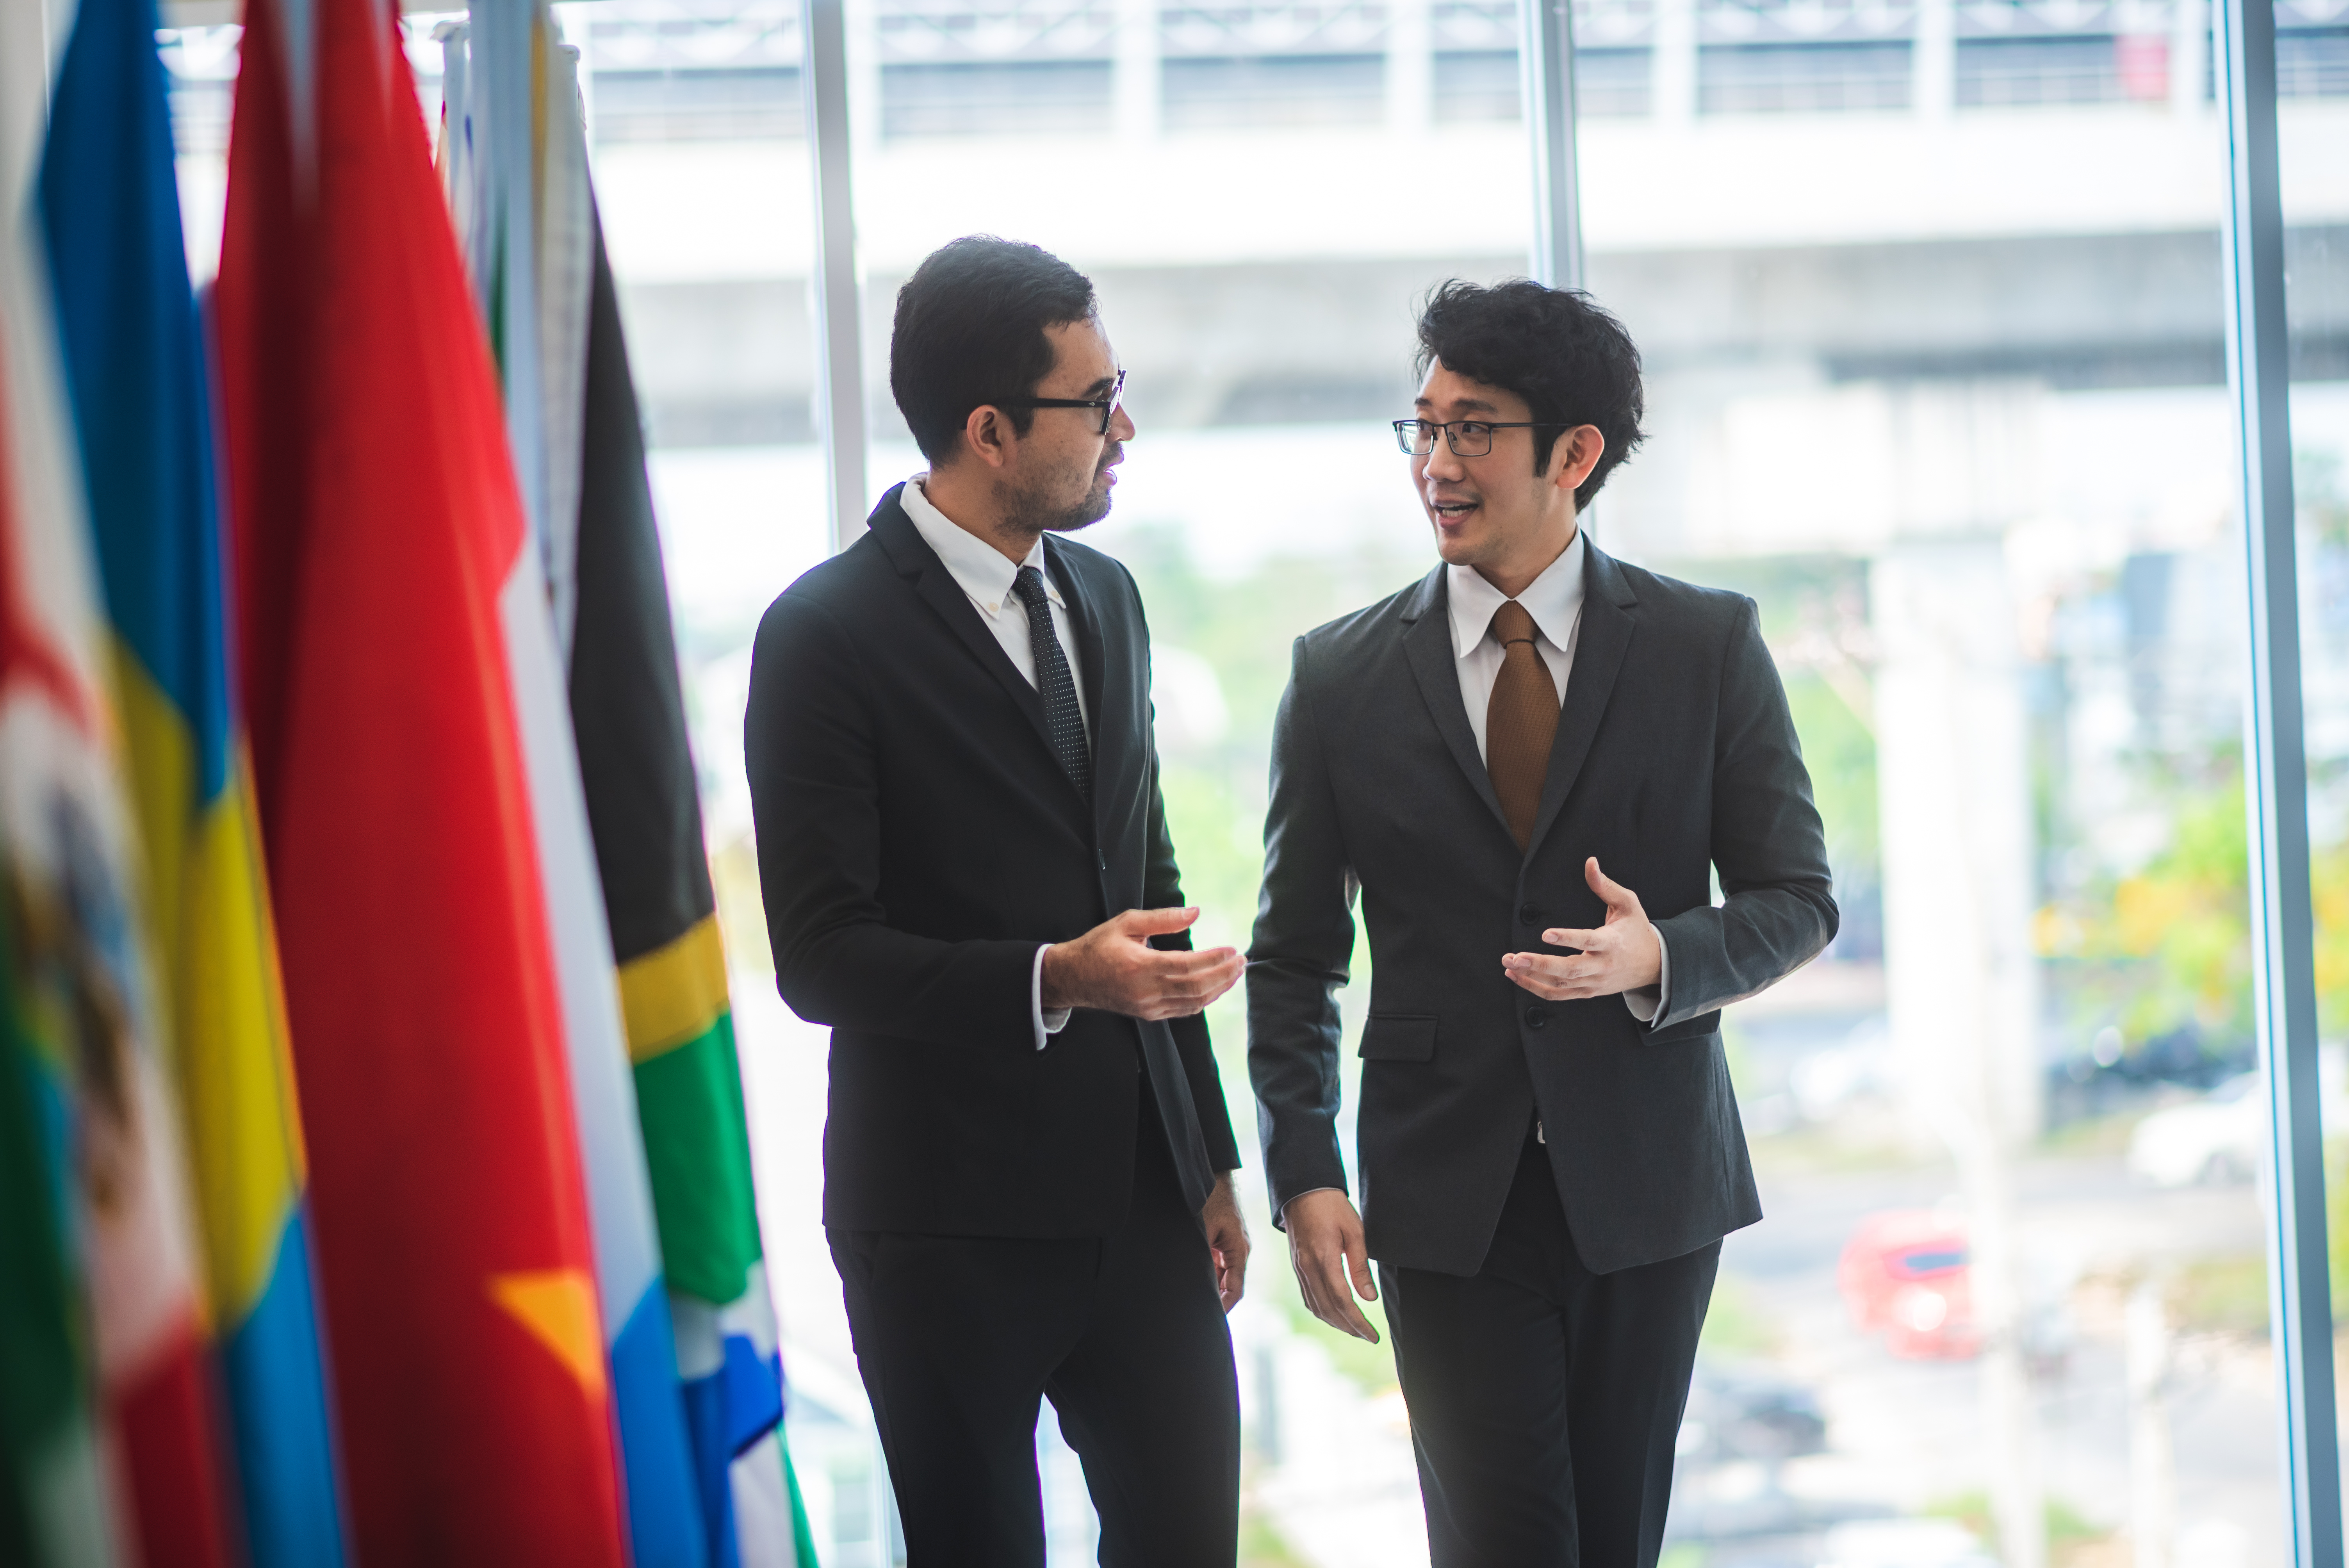 Photo of two middle-aged men in business suits and glasses, talking to each other as they walk past a row of flags of different countries.